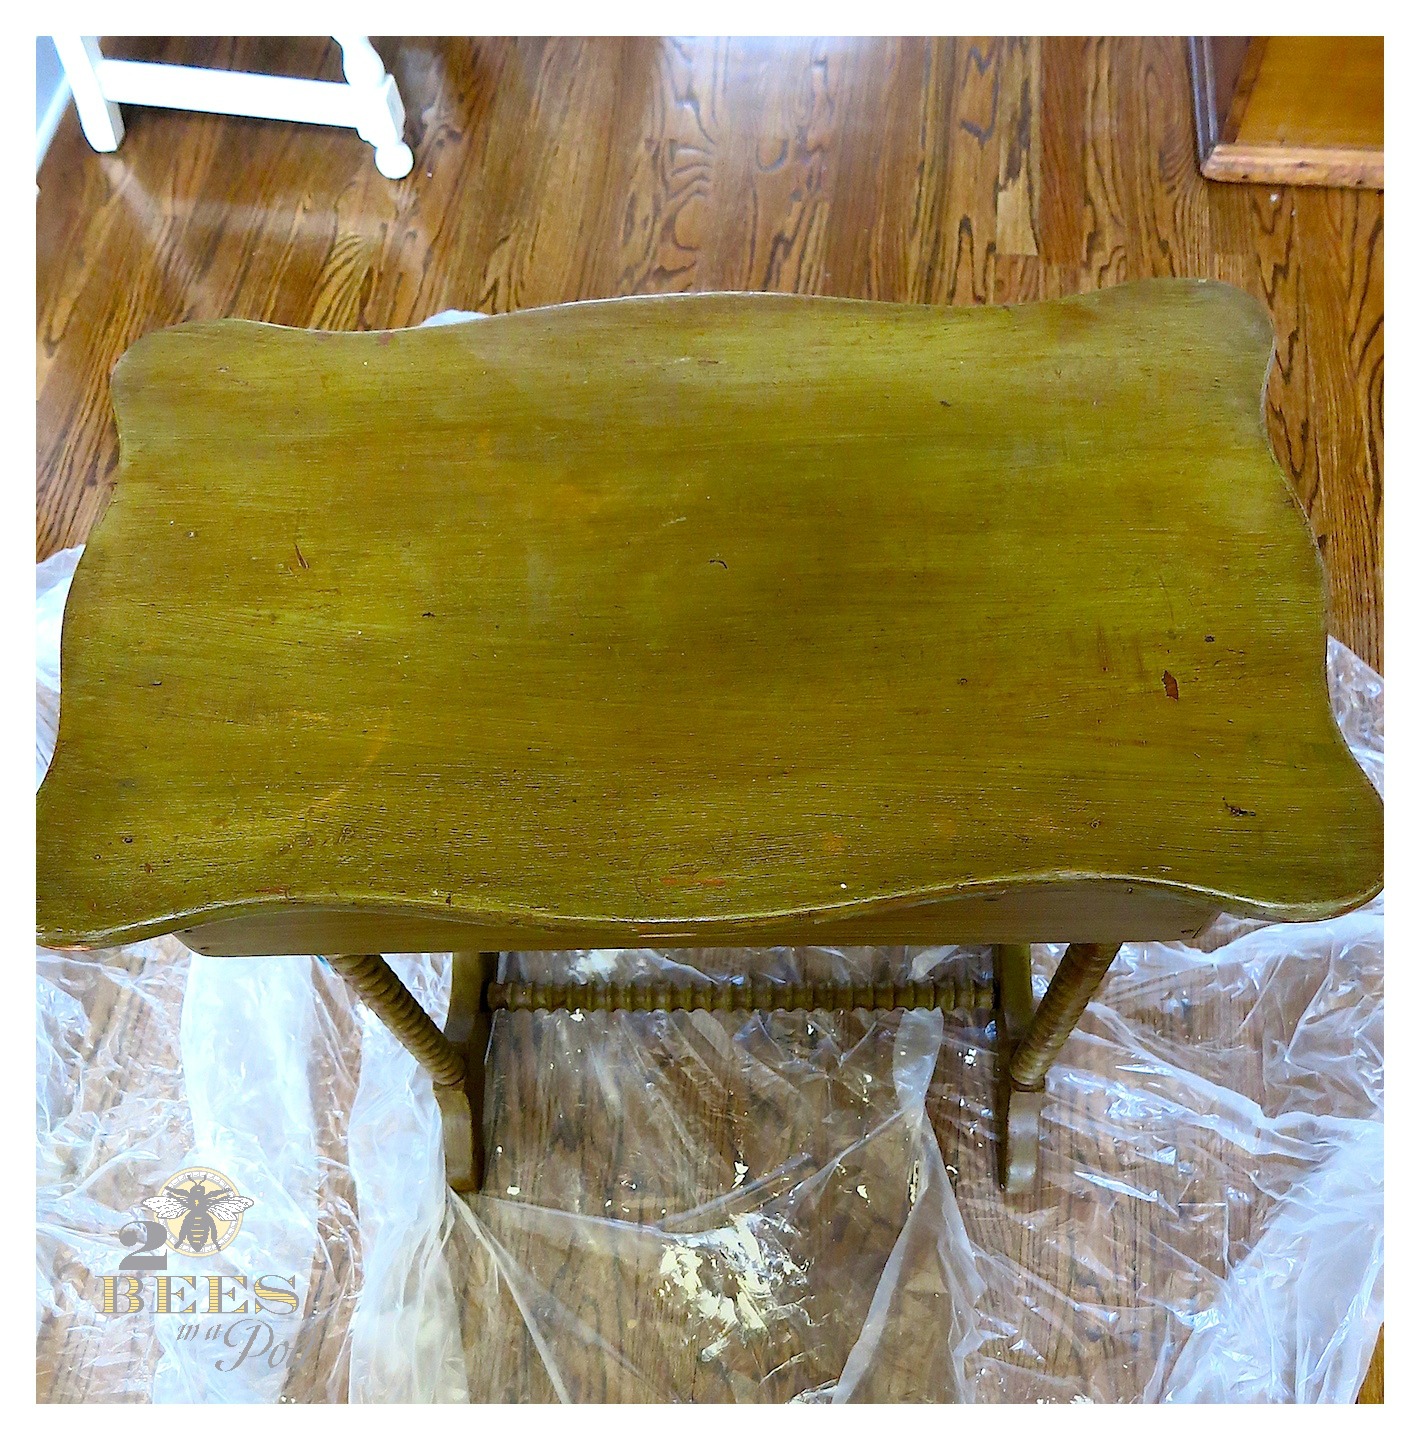 A $10 Thrifted Table Gets a Makeover - with homemade chalk paint, distressing and a coat of wax